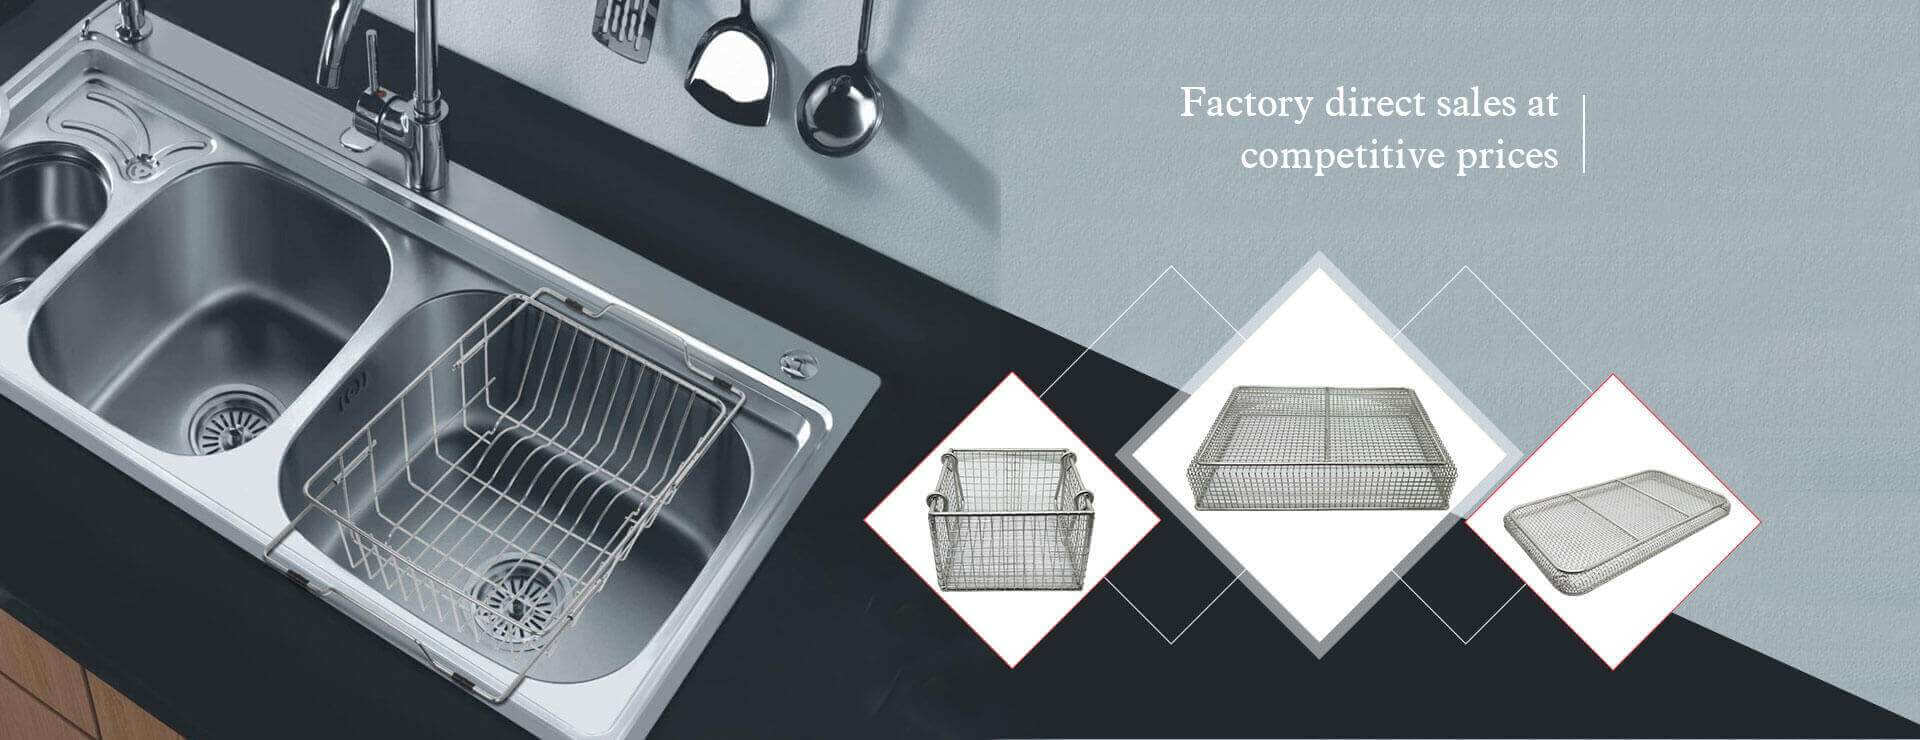 Stainless Steel Wire Mesh Basket